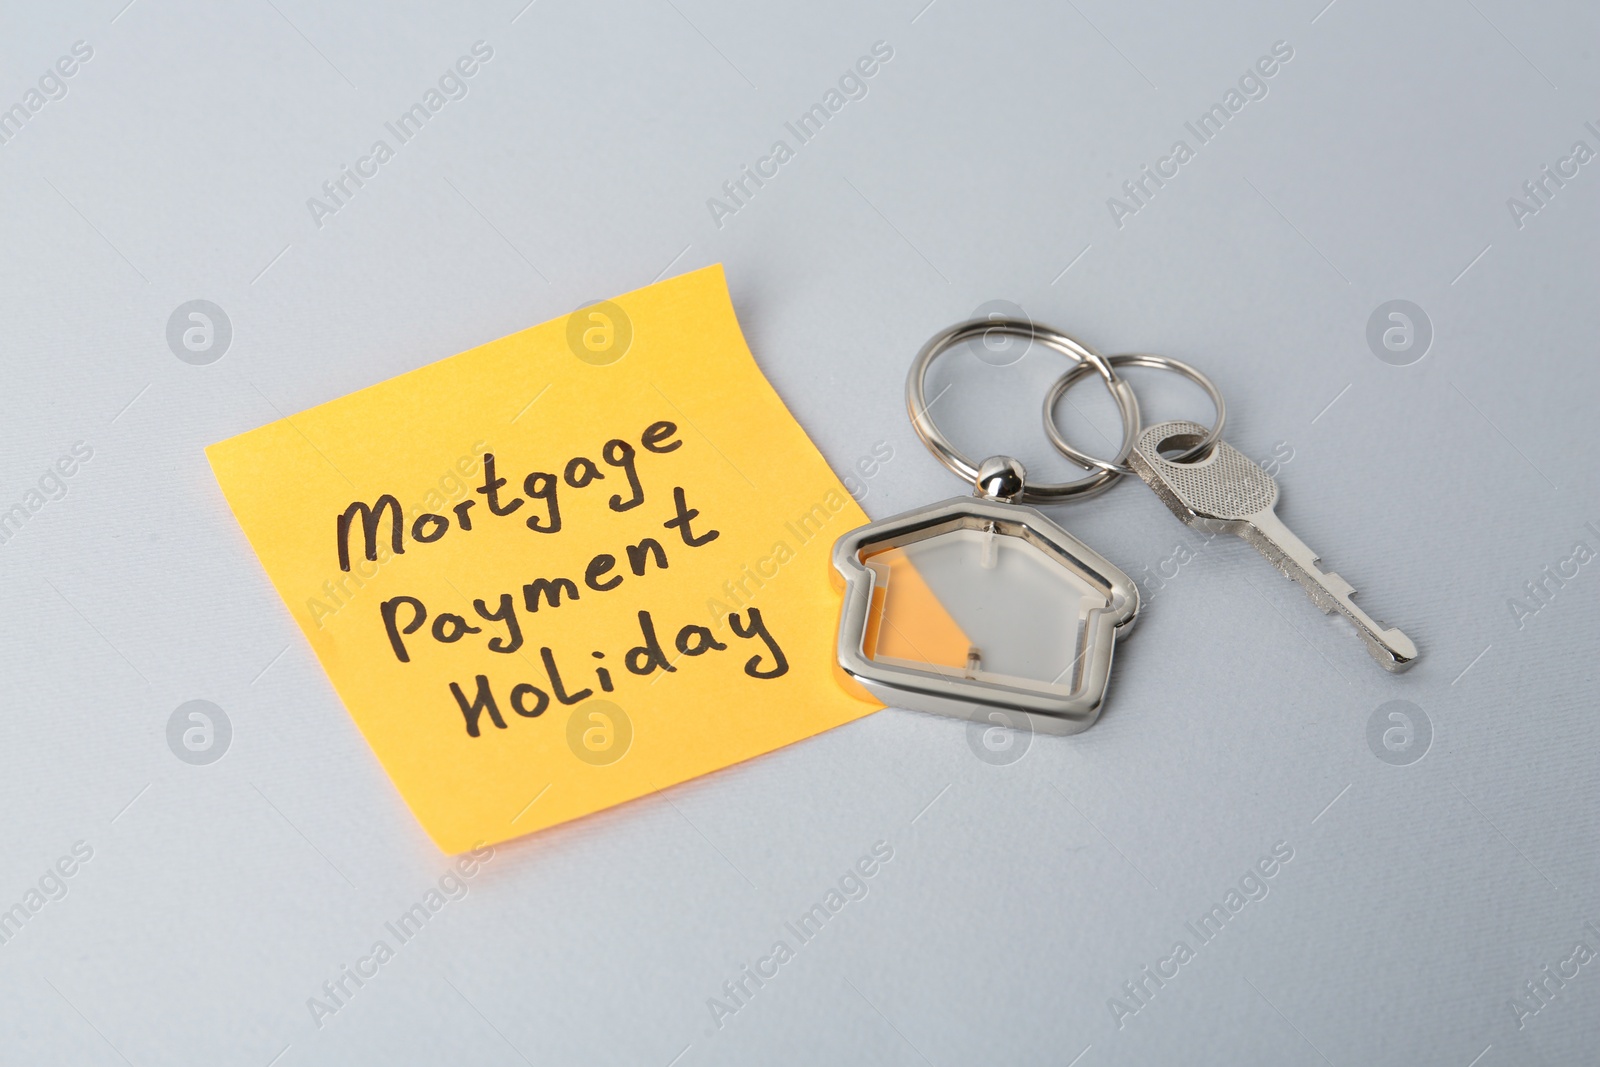 Photo of Key with trinket in shape of house and phrase Mortgage payment holiday written on sticky note against light grey background